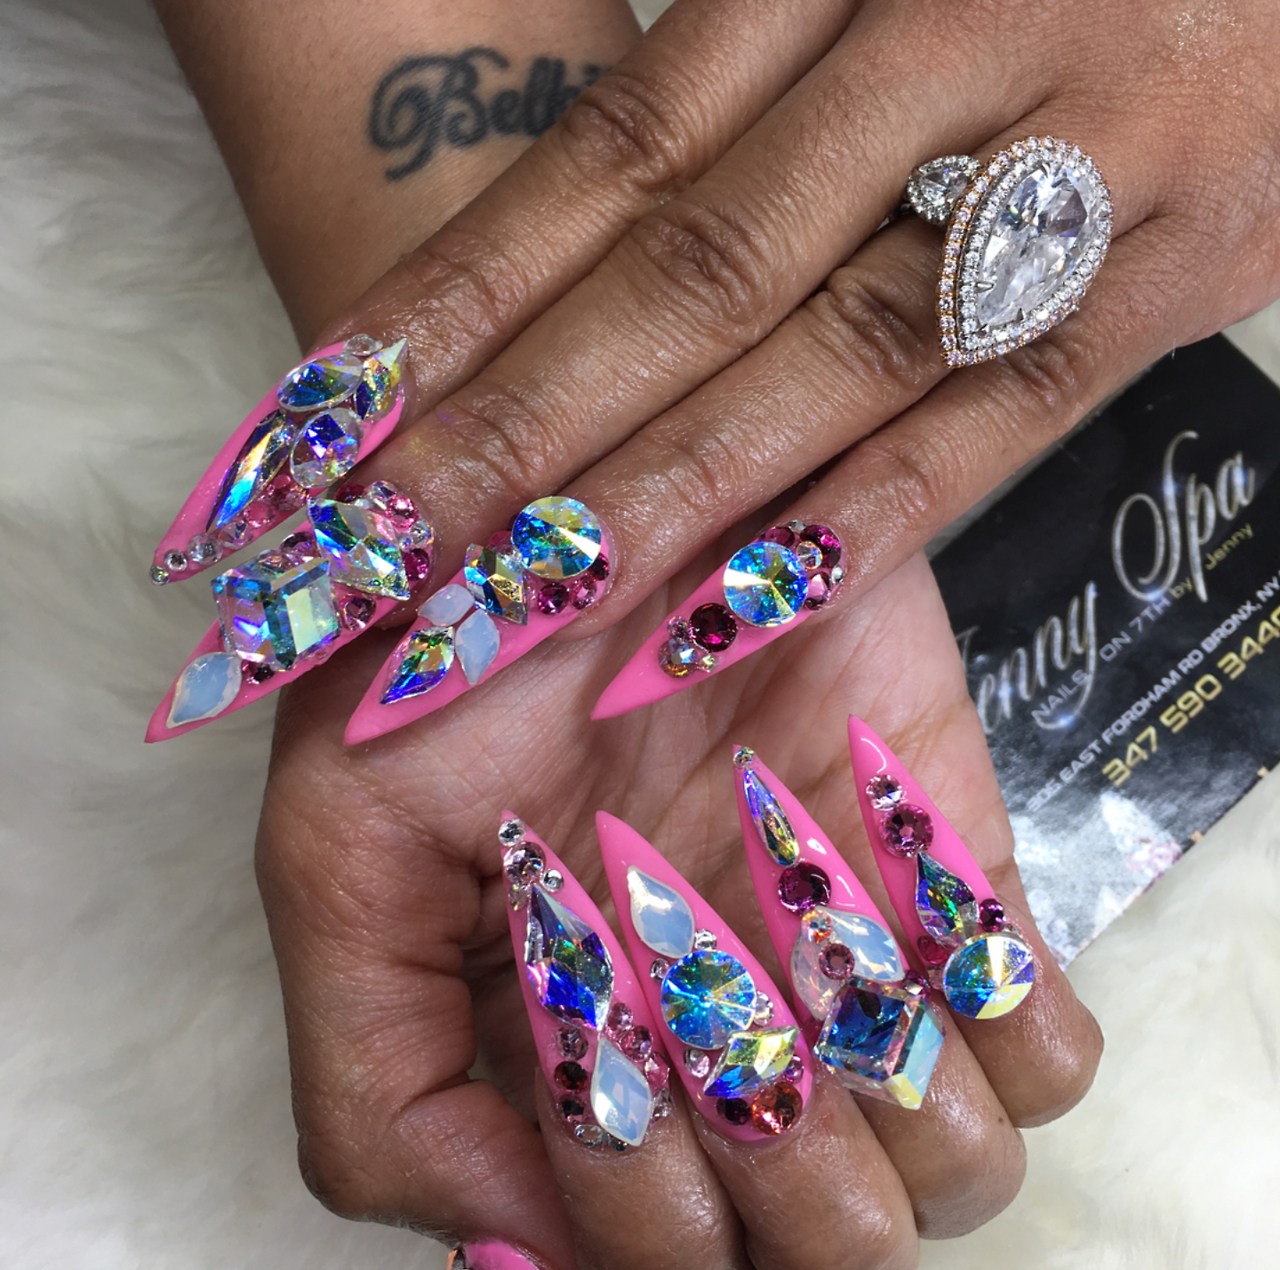 Cardi B's Most Extravagant Nails (We Might Actually Consider)